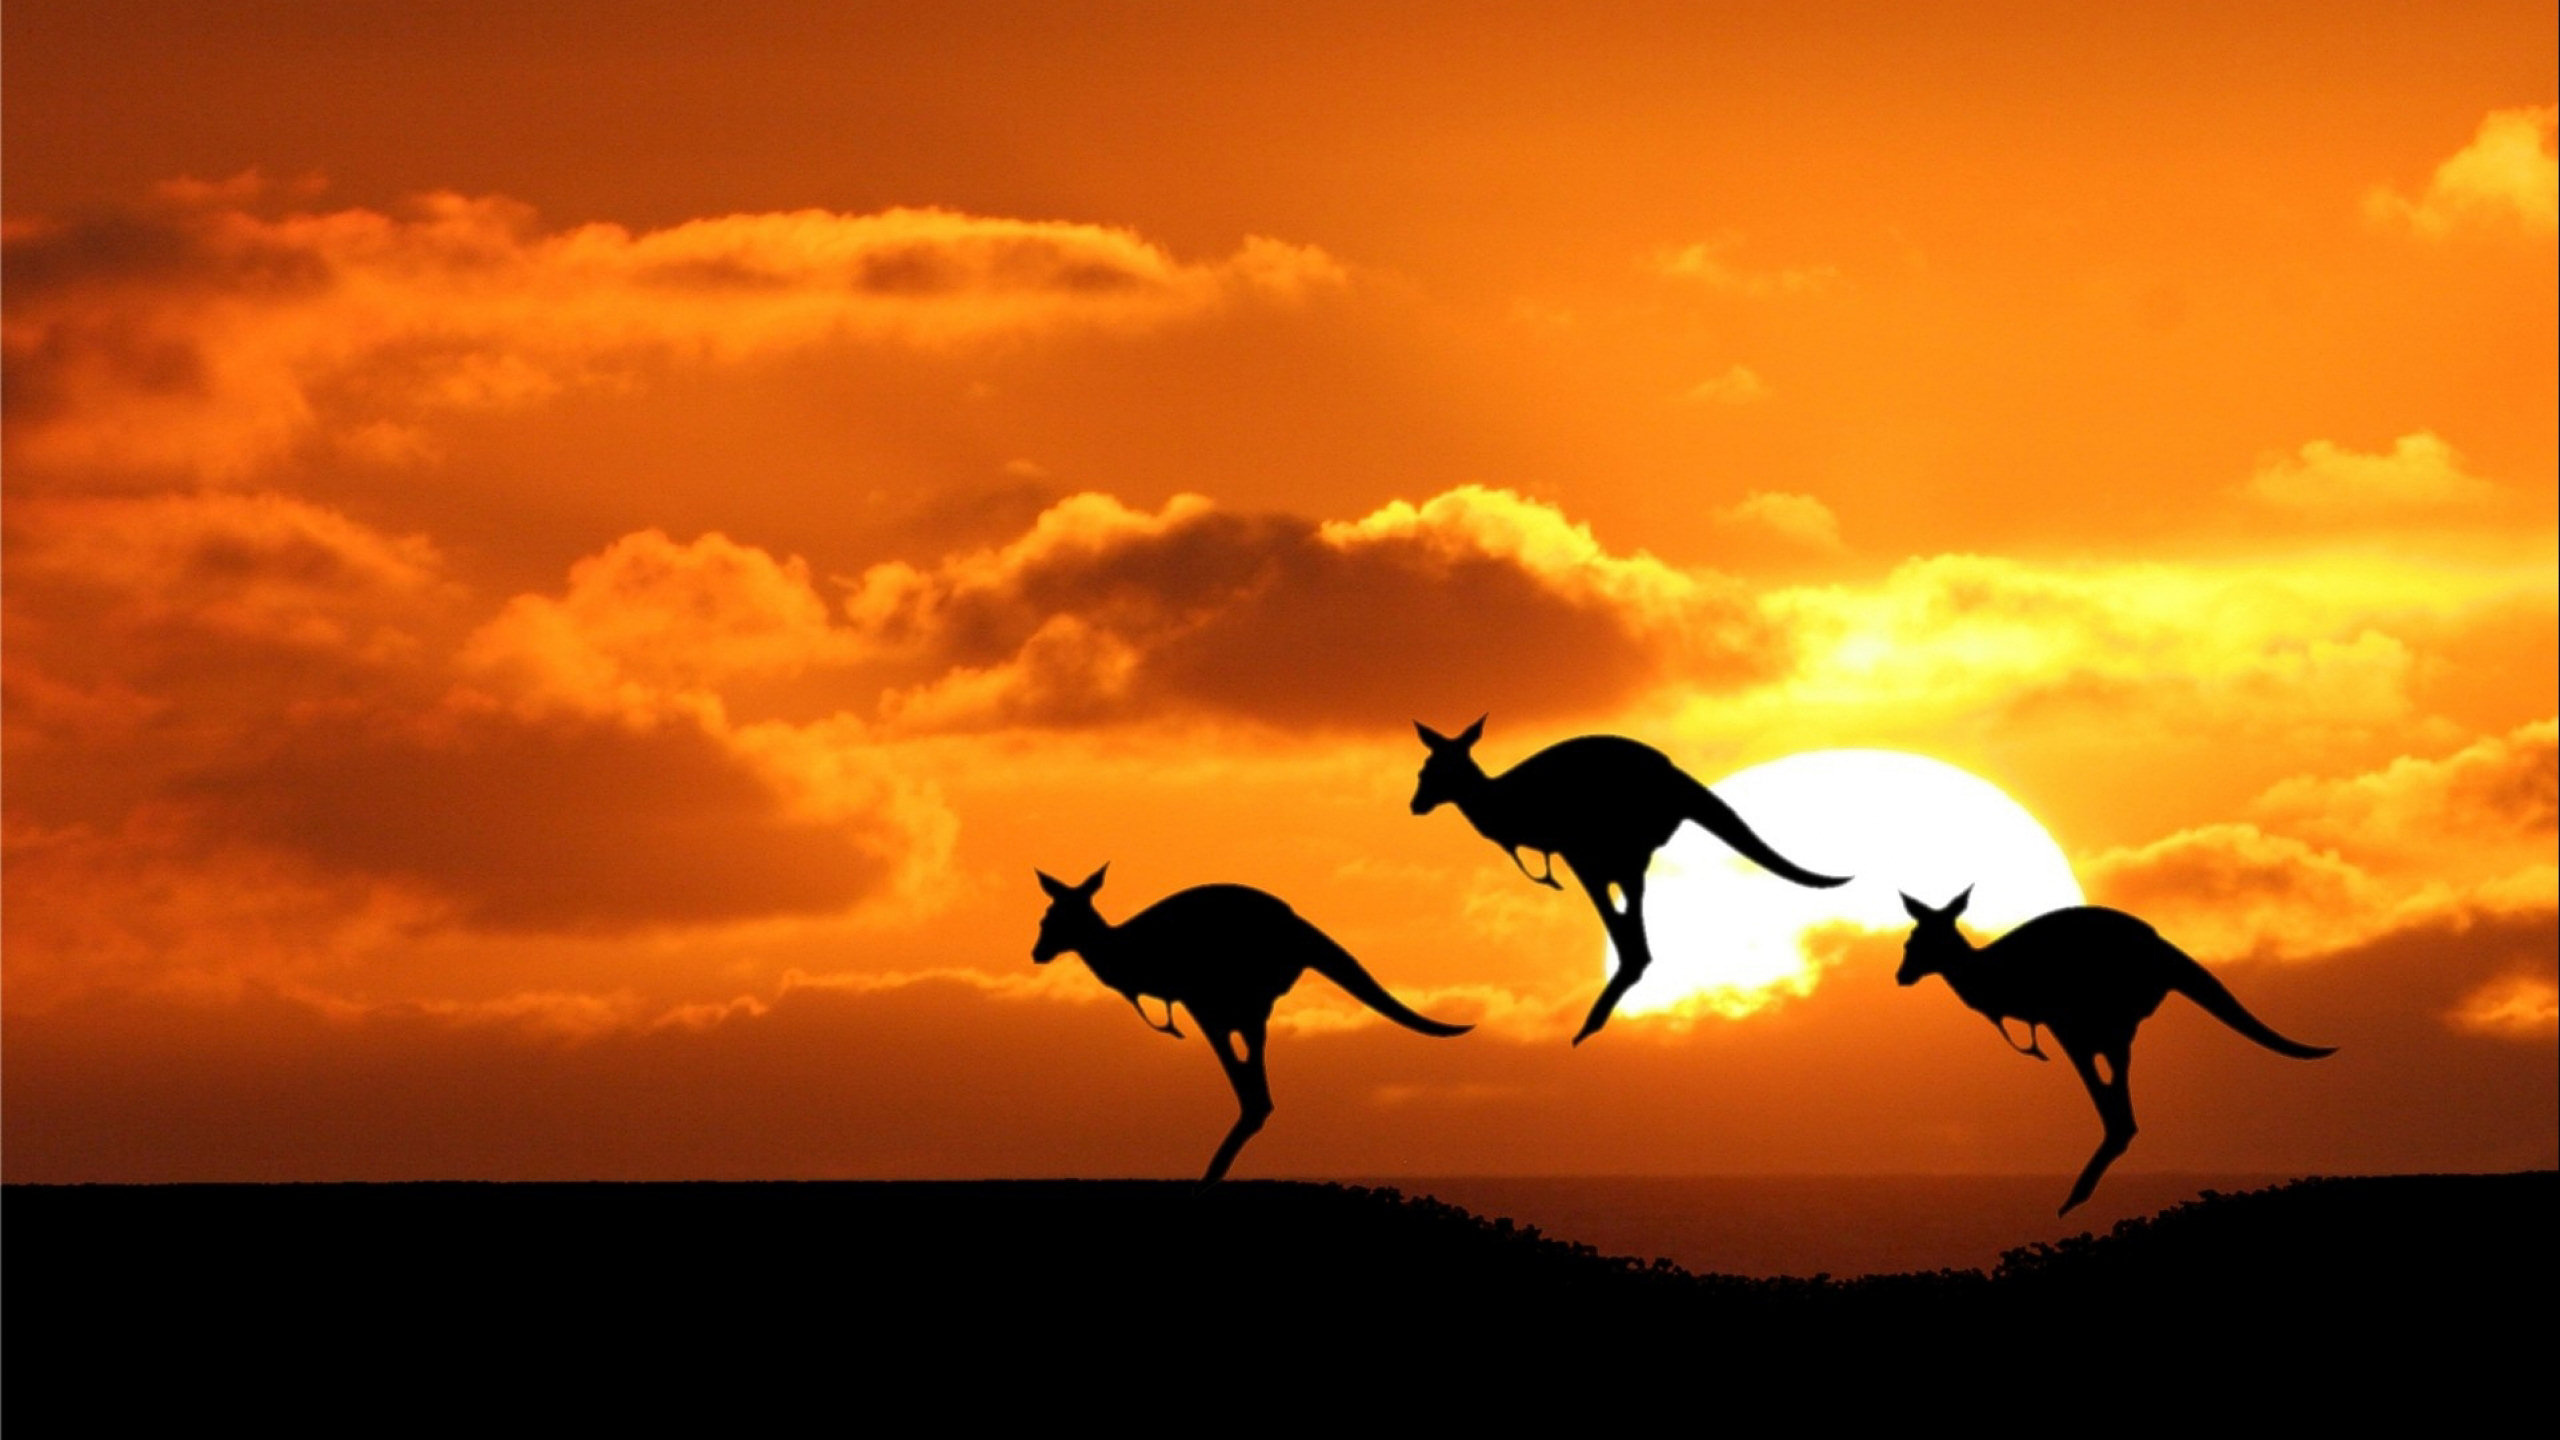 Silhouette of Deer on Grass Field During Sunset. Wallpaper in 2560x1440 Resolution